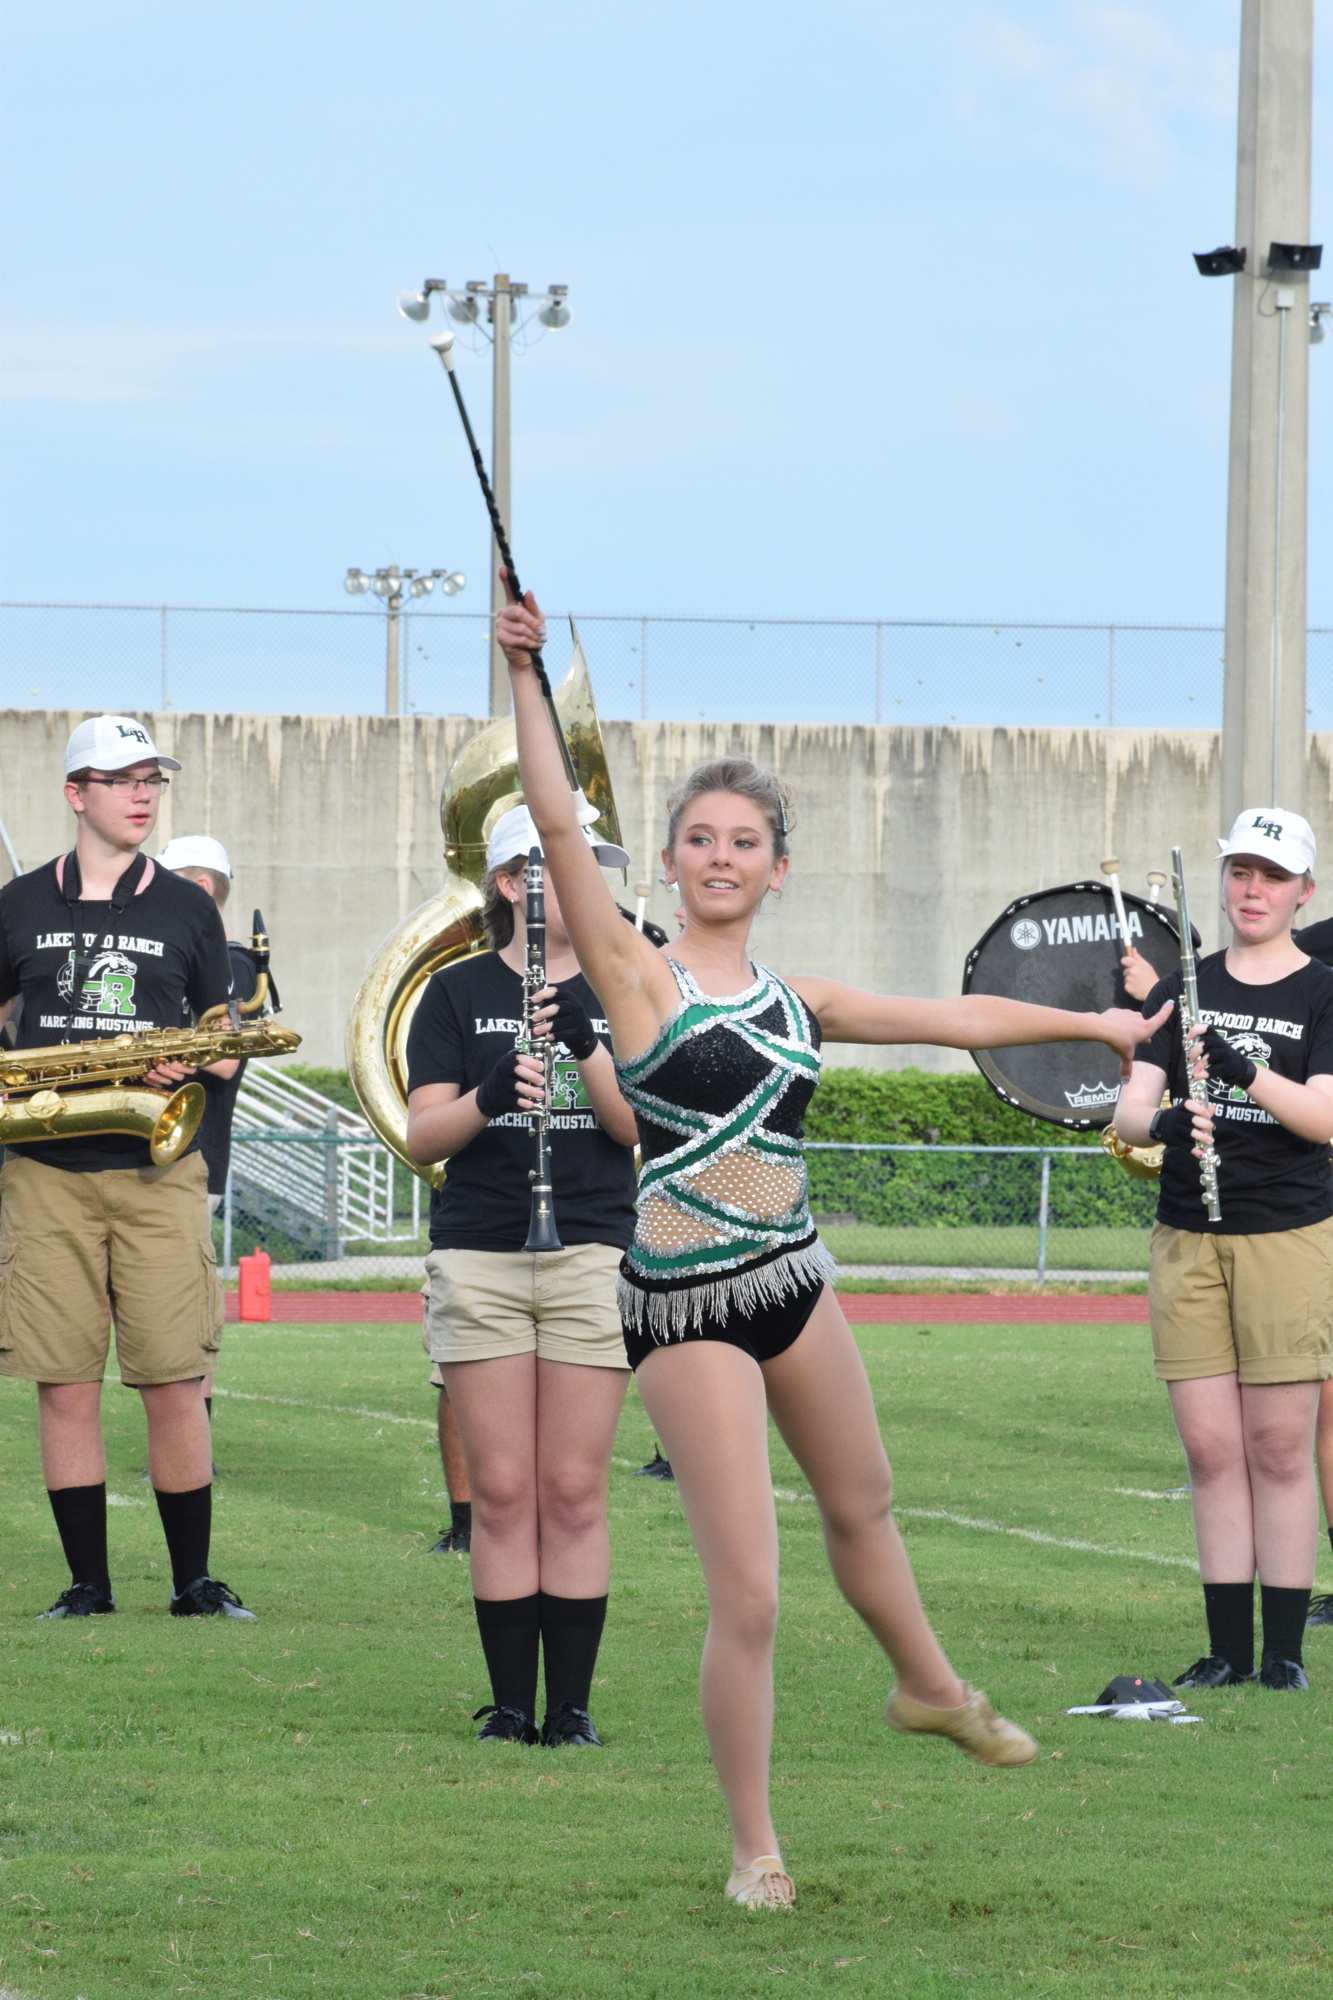 Tiffany McCoy, a junior, has been twirling  batons since she was in first grade and has been competing for 10 years.